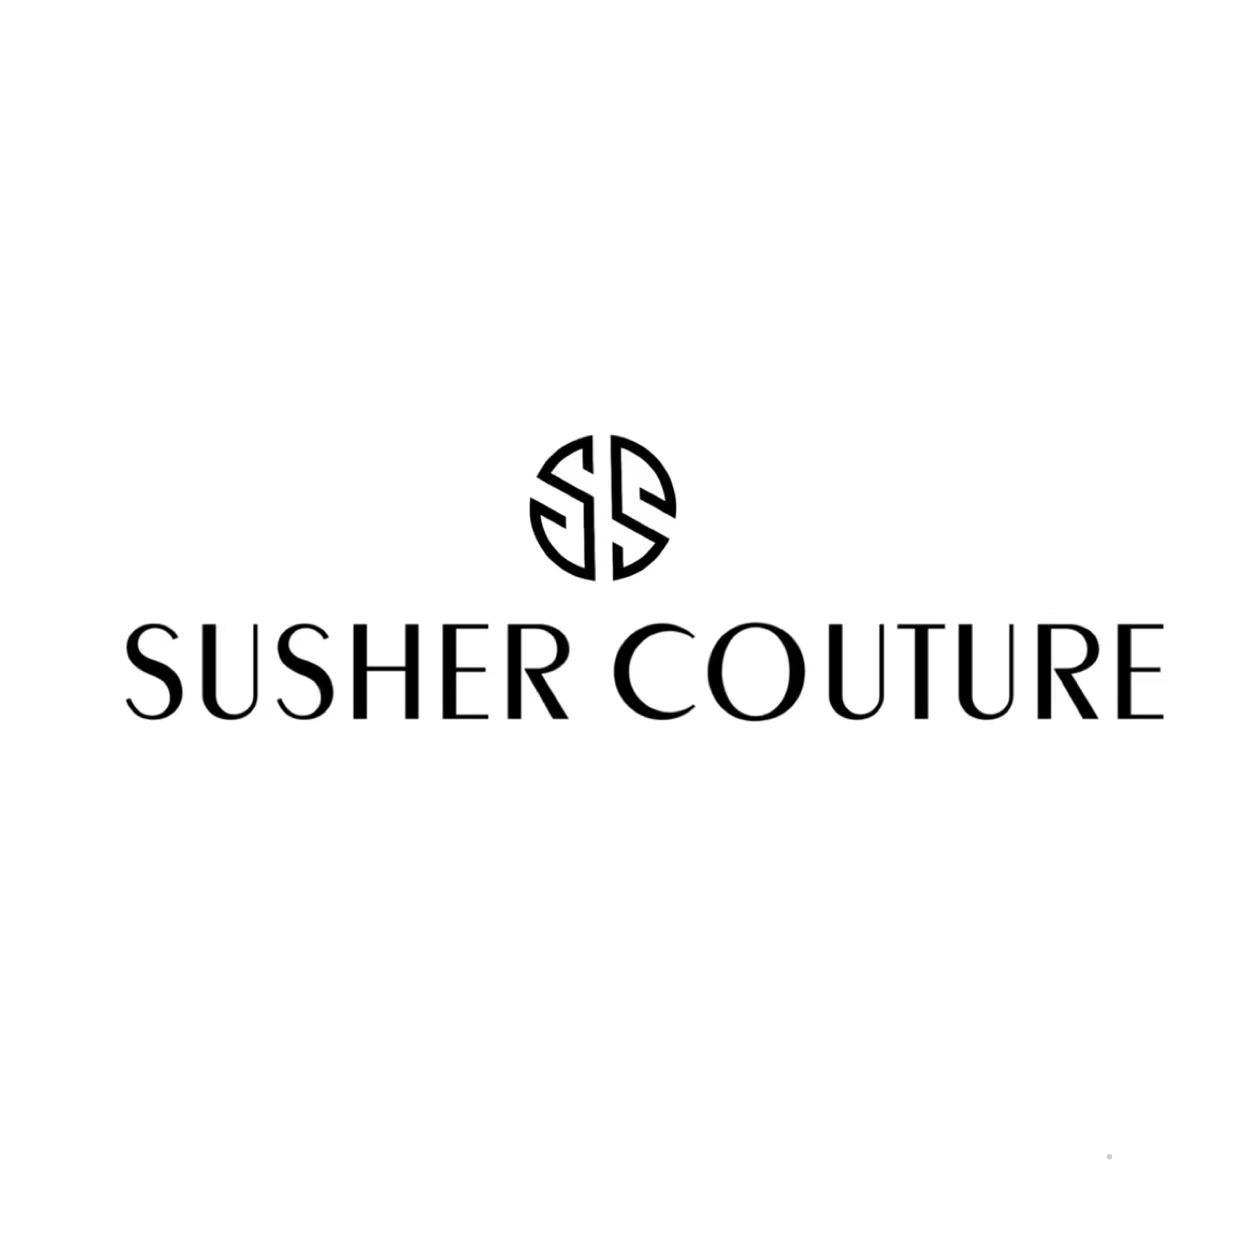 SUSHER COUTURE广告销售